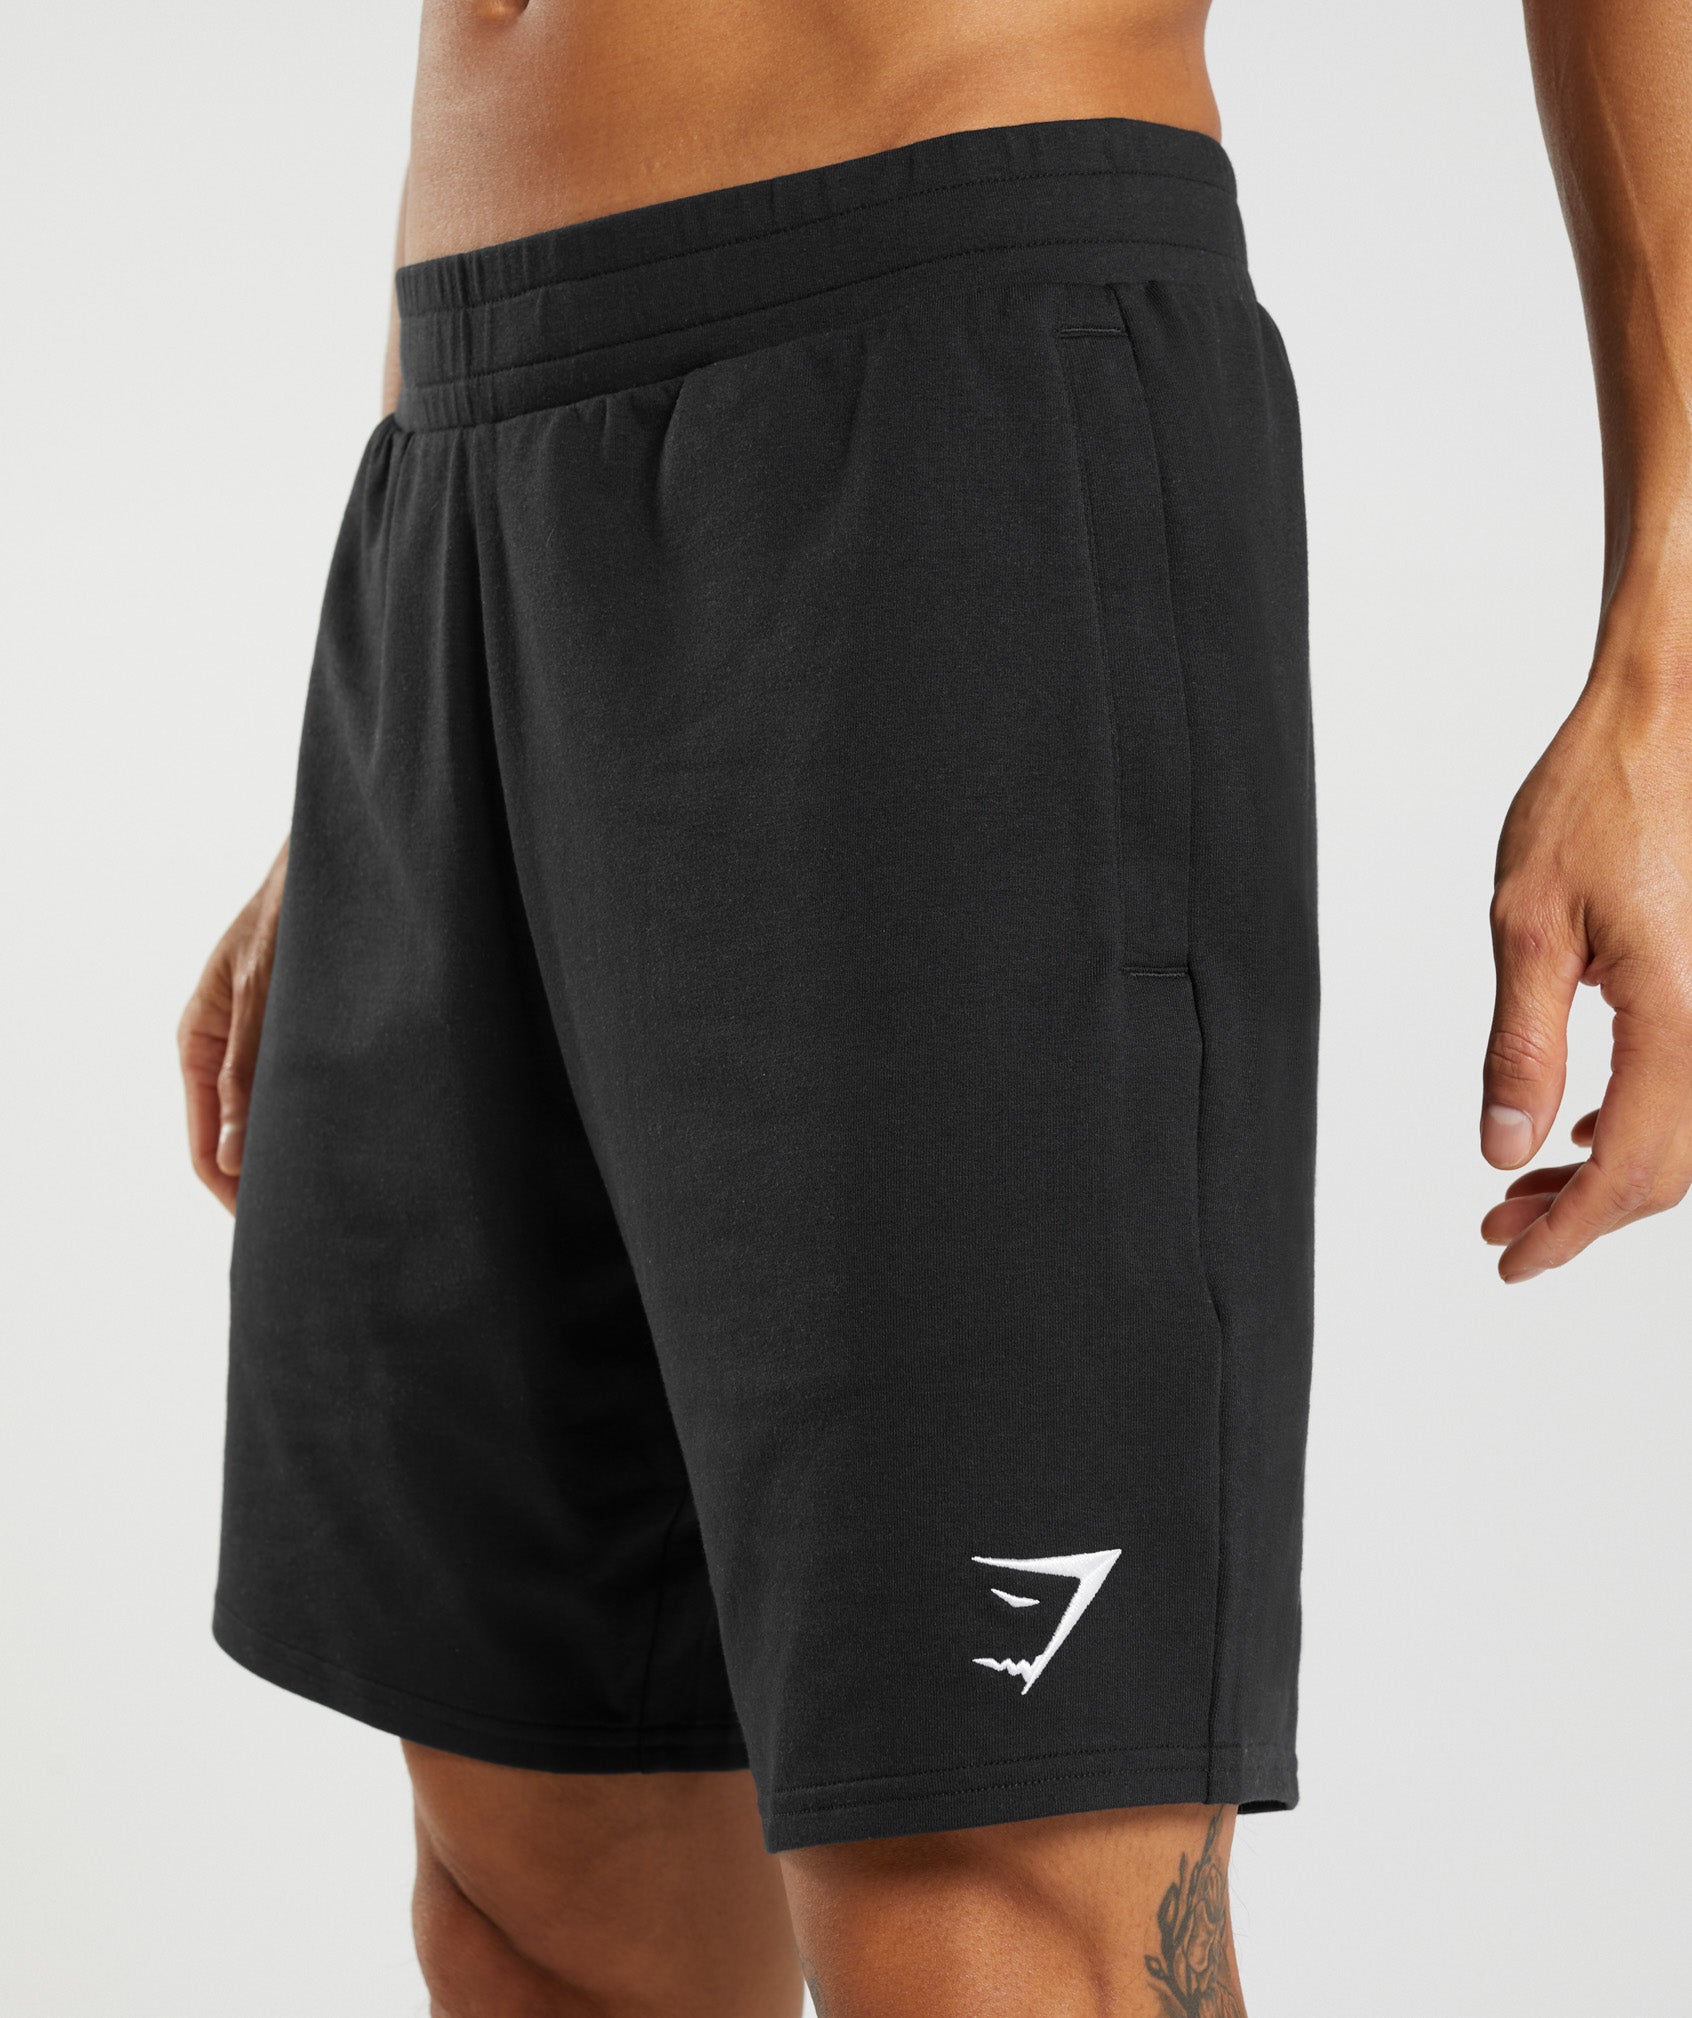 Critical 7" Shorts in Black - view 4